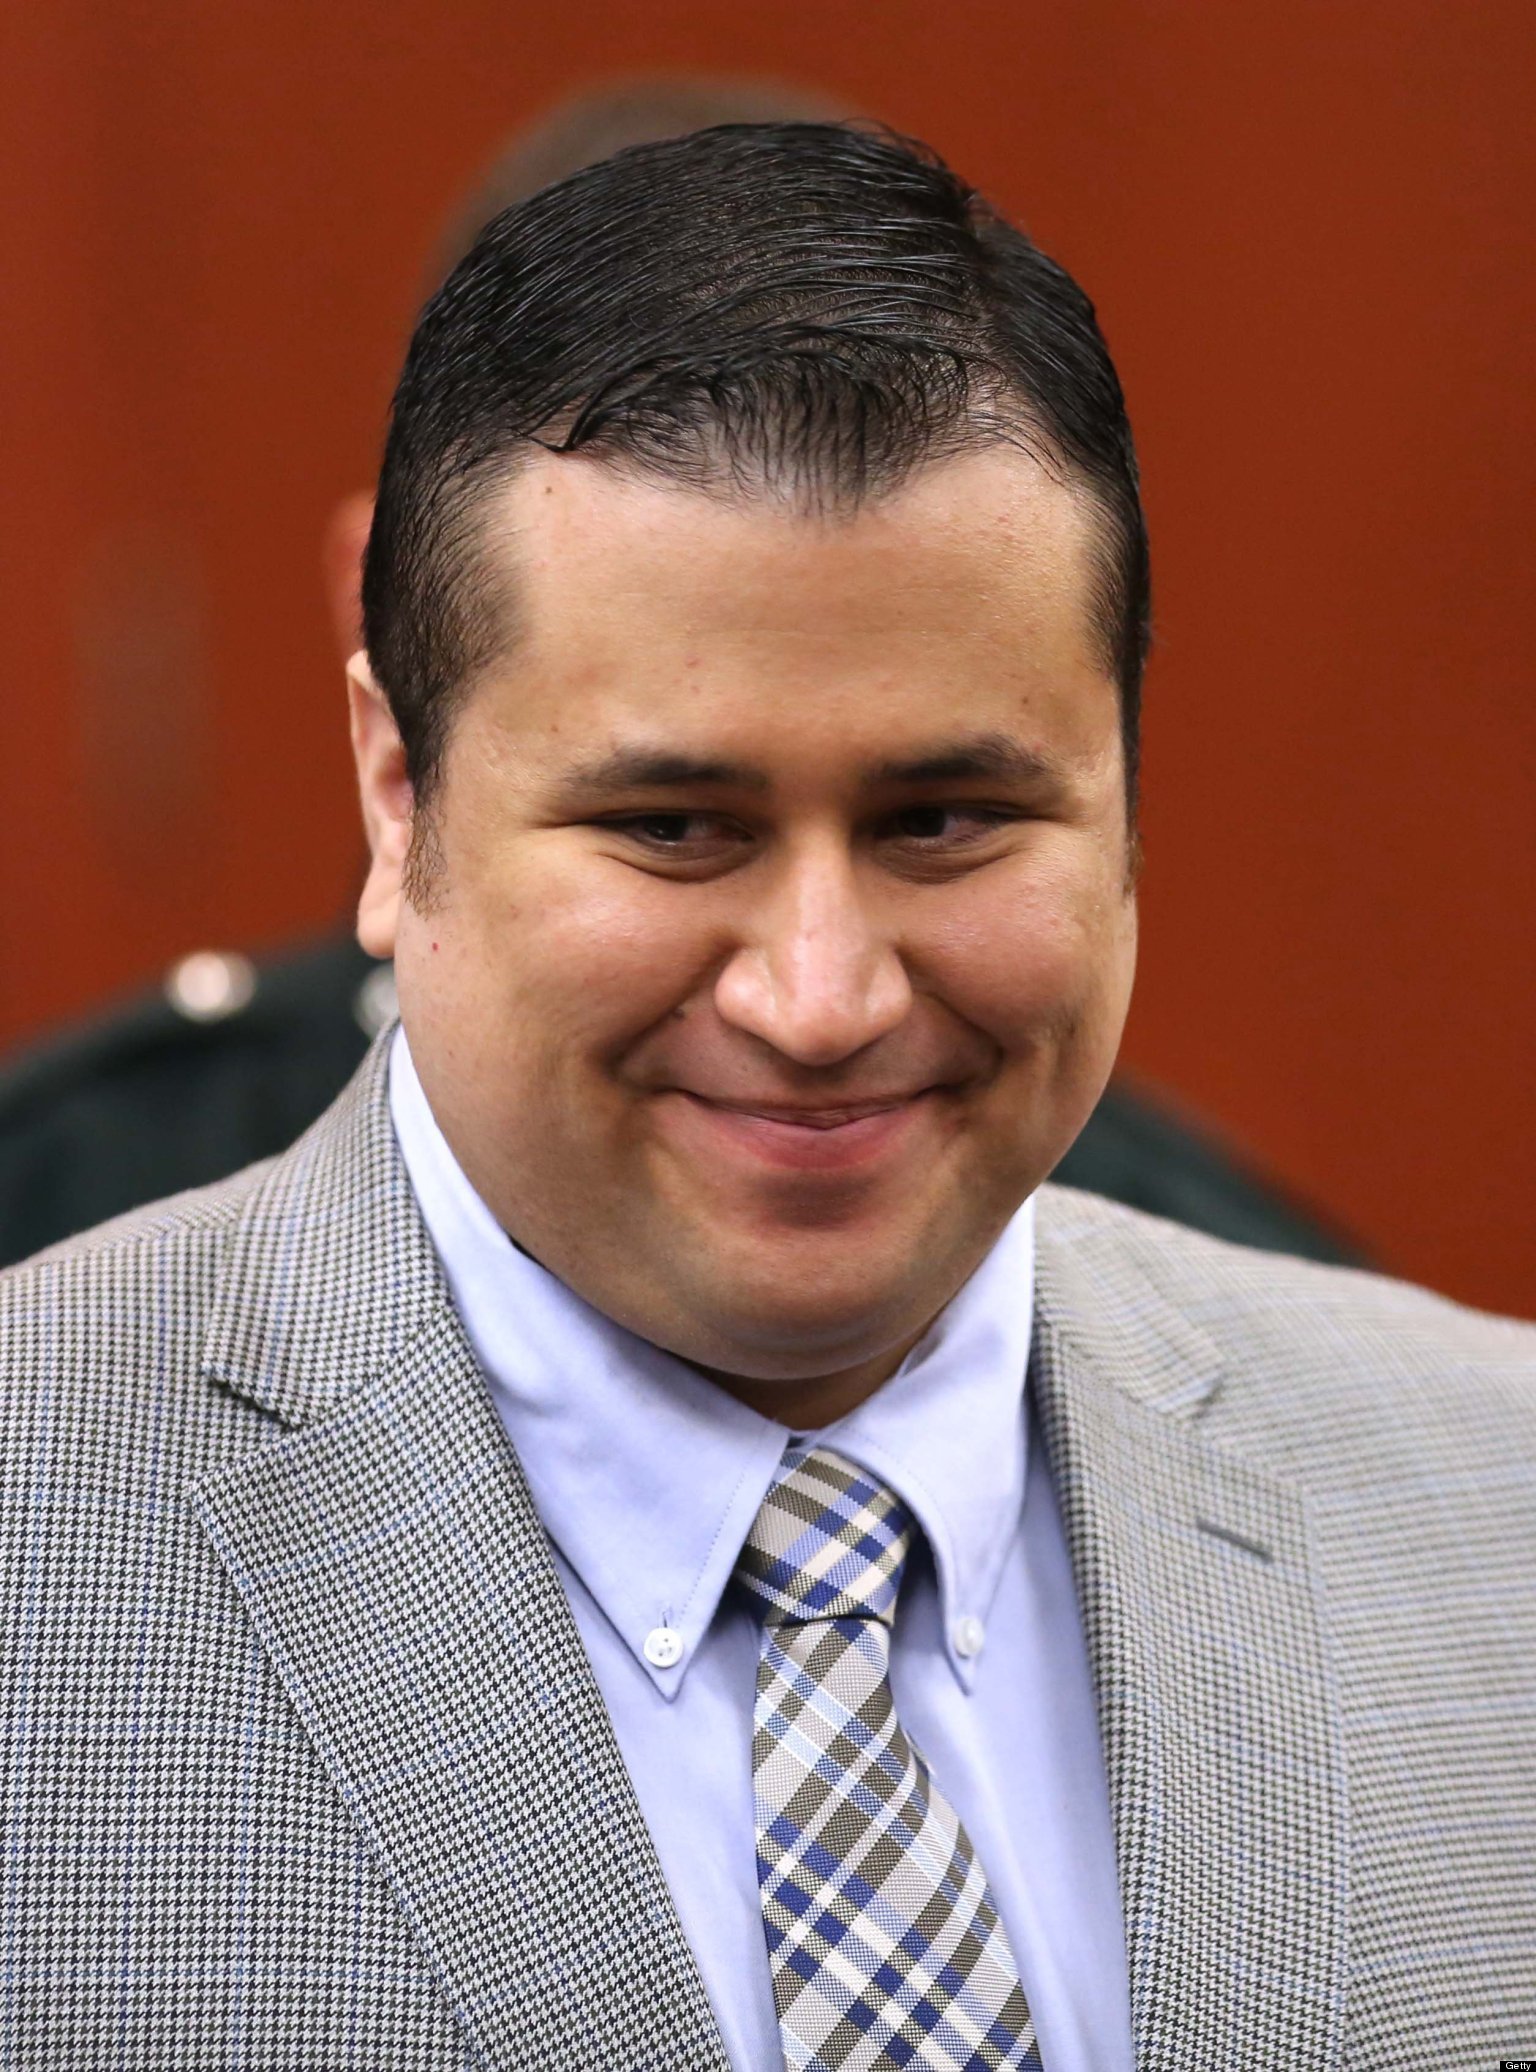 Zimmerman Trial Live Updates Potential Juror Excused After